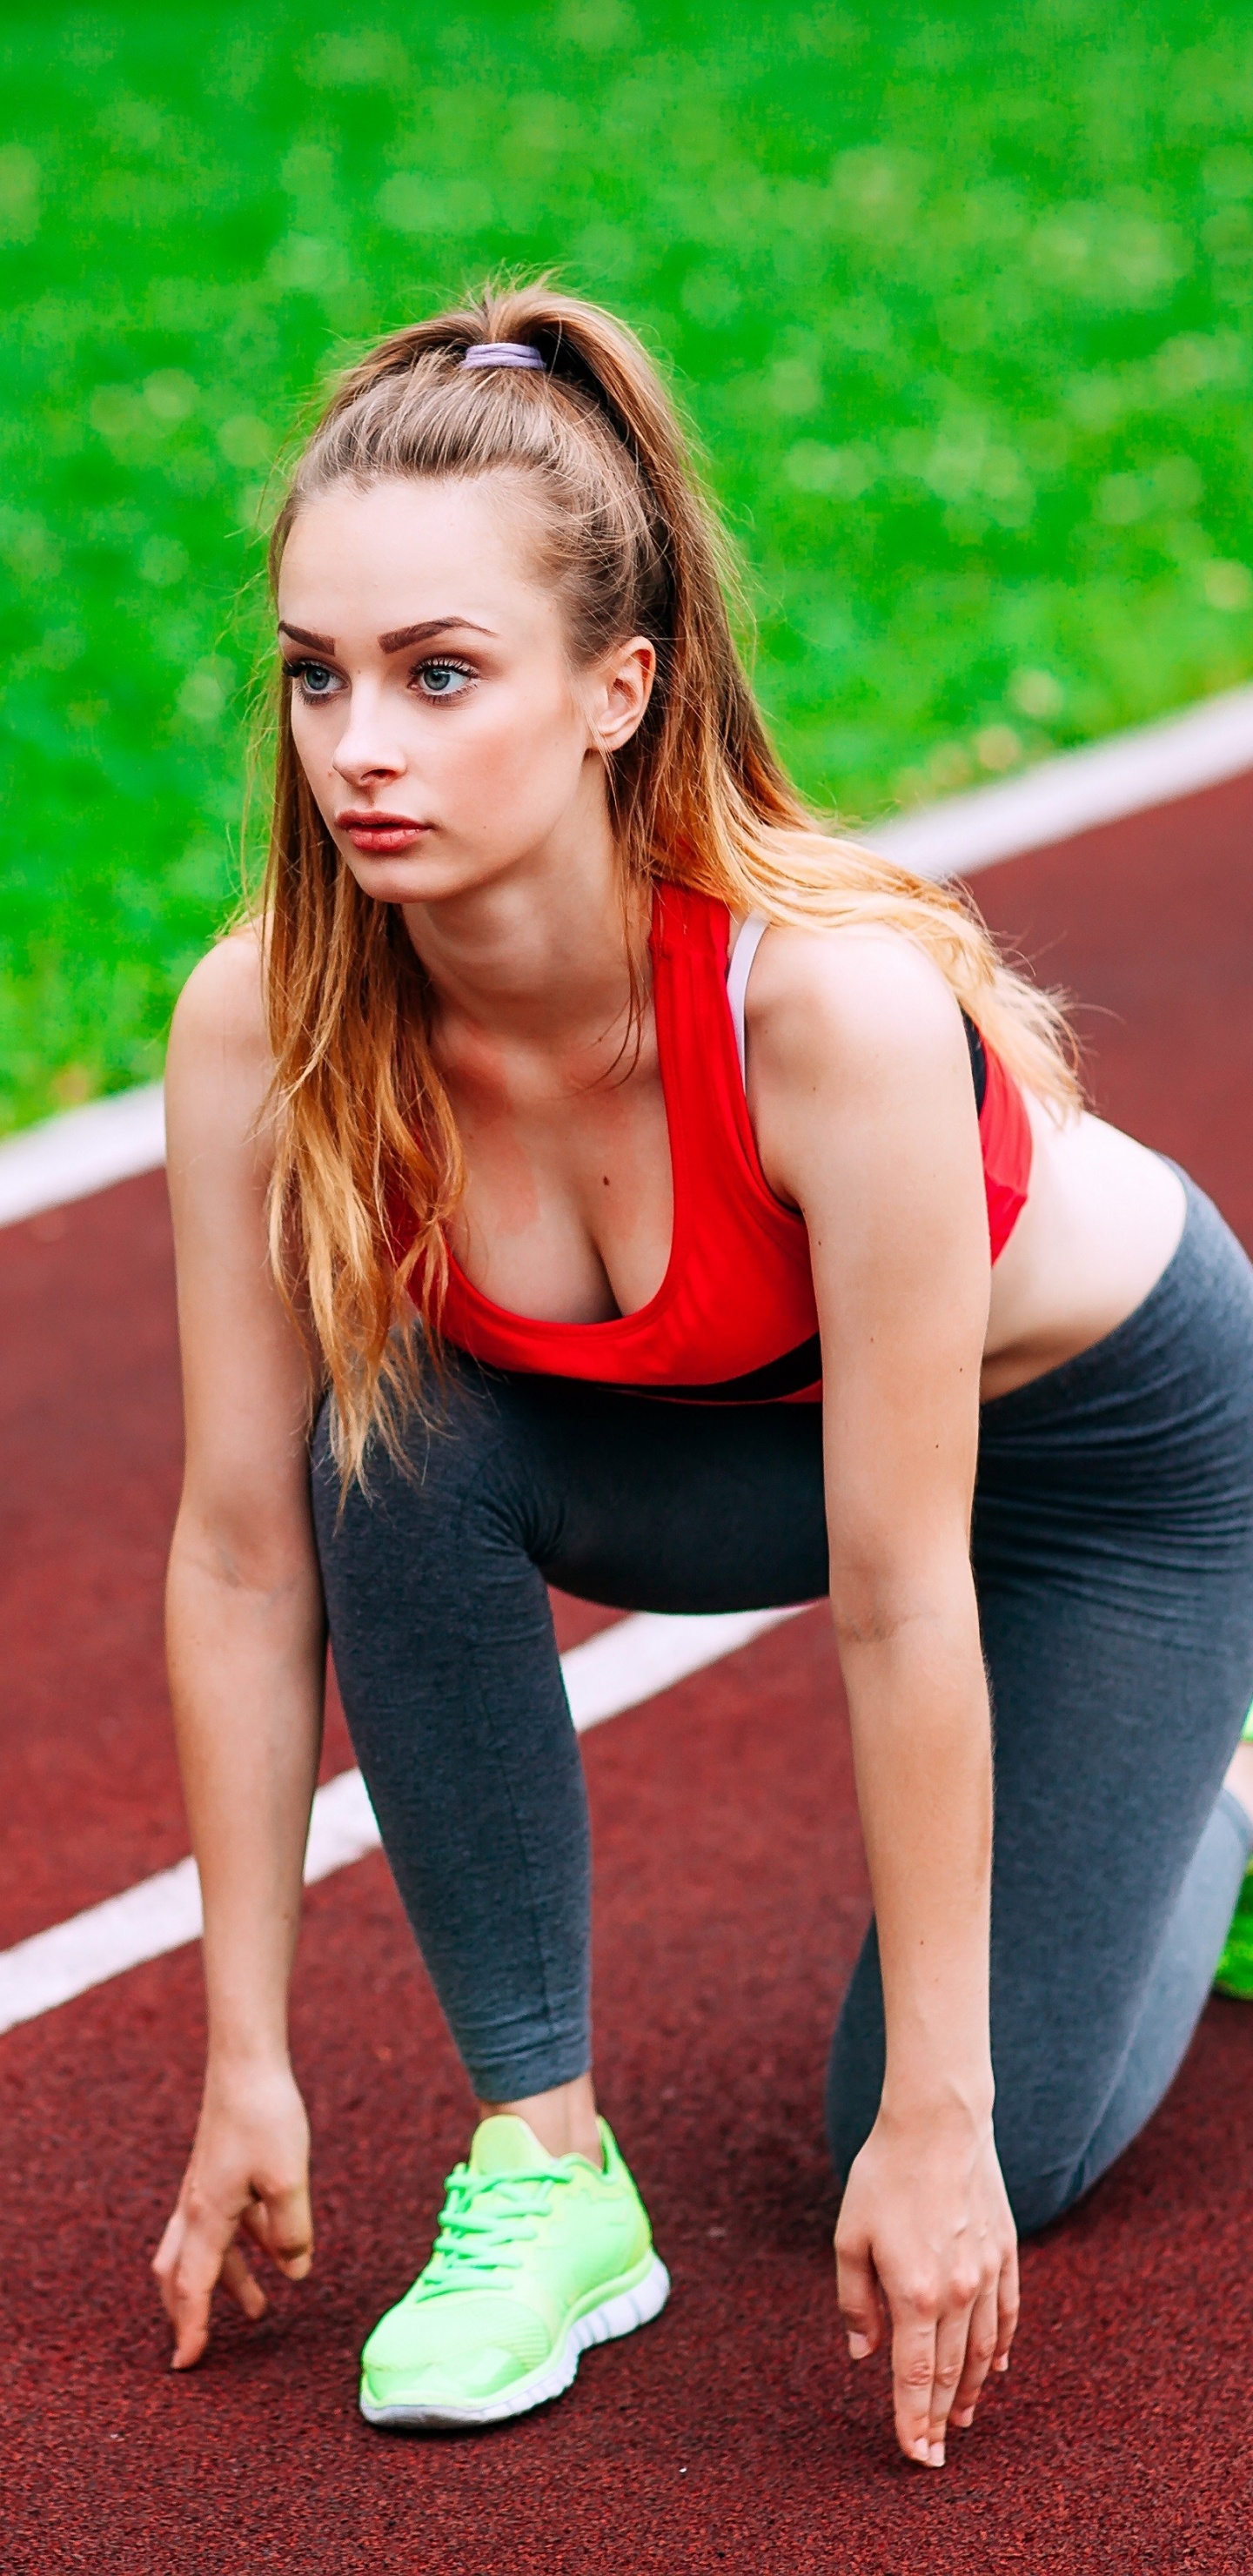 Woman in Black Tank Top and Green Shorts Running on Track Field During Daytime. Wallpaper in 1440x2960 Resolution